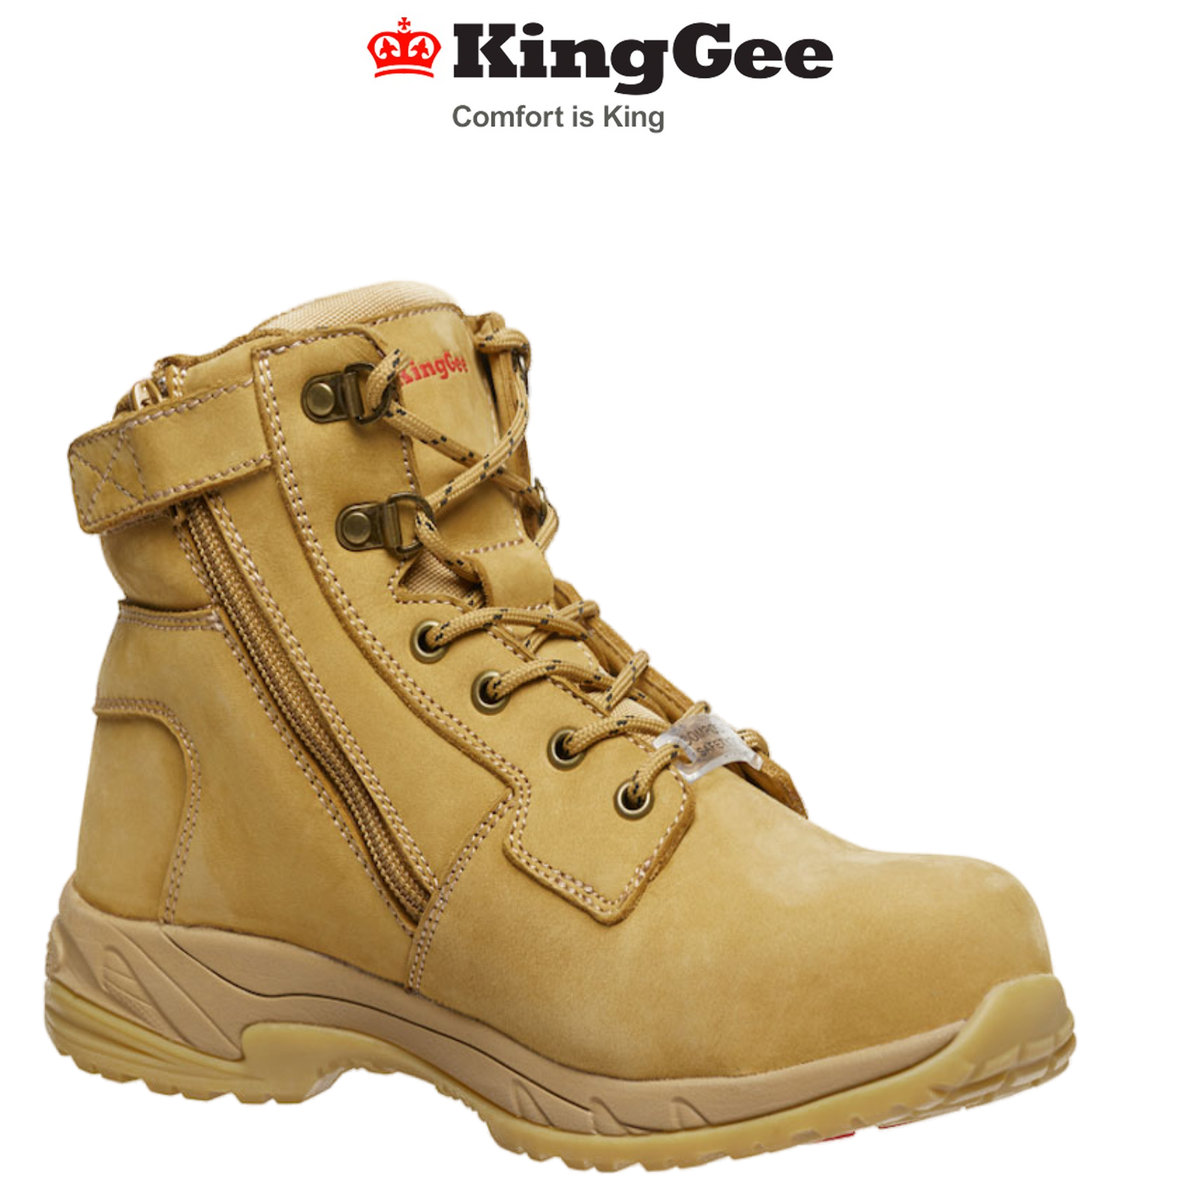 KingGee Womens Tradie Zip Work Safety Boots Nubuck Leather Comfortable K27380